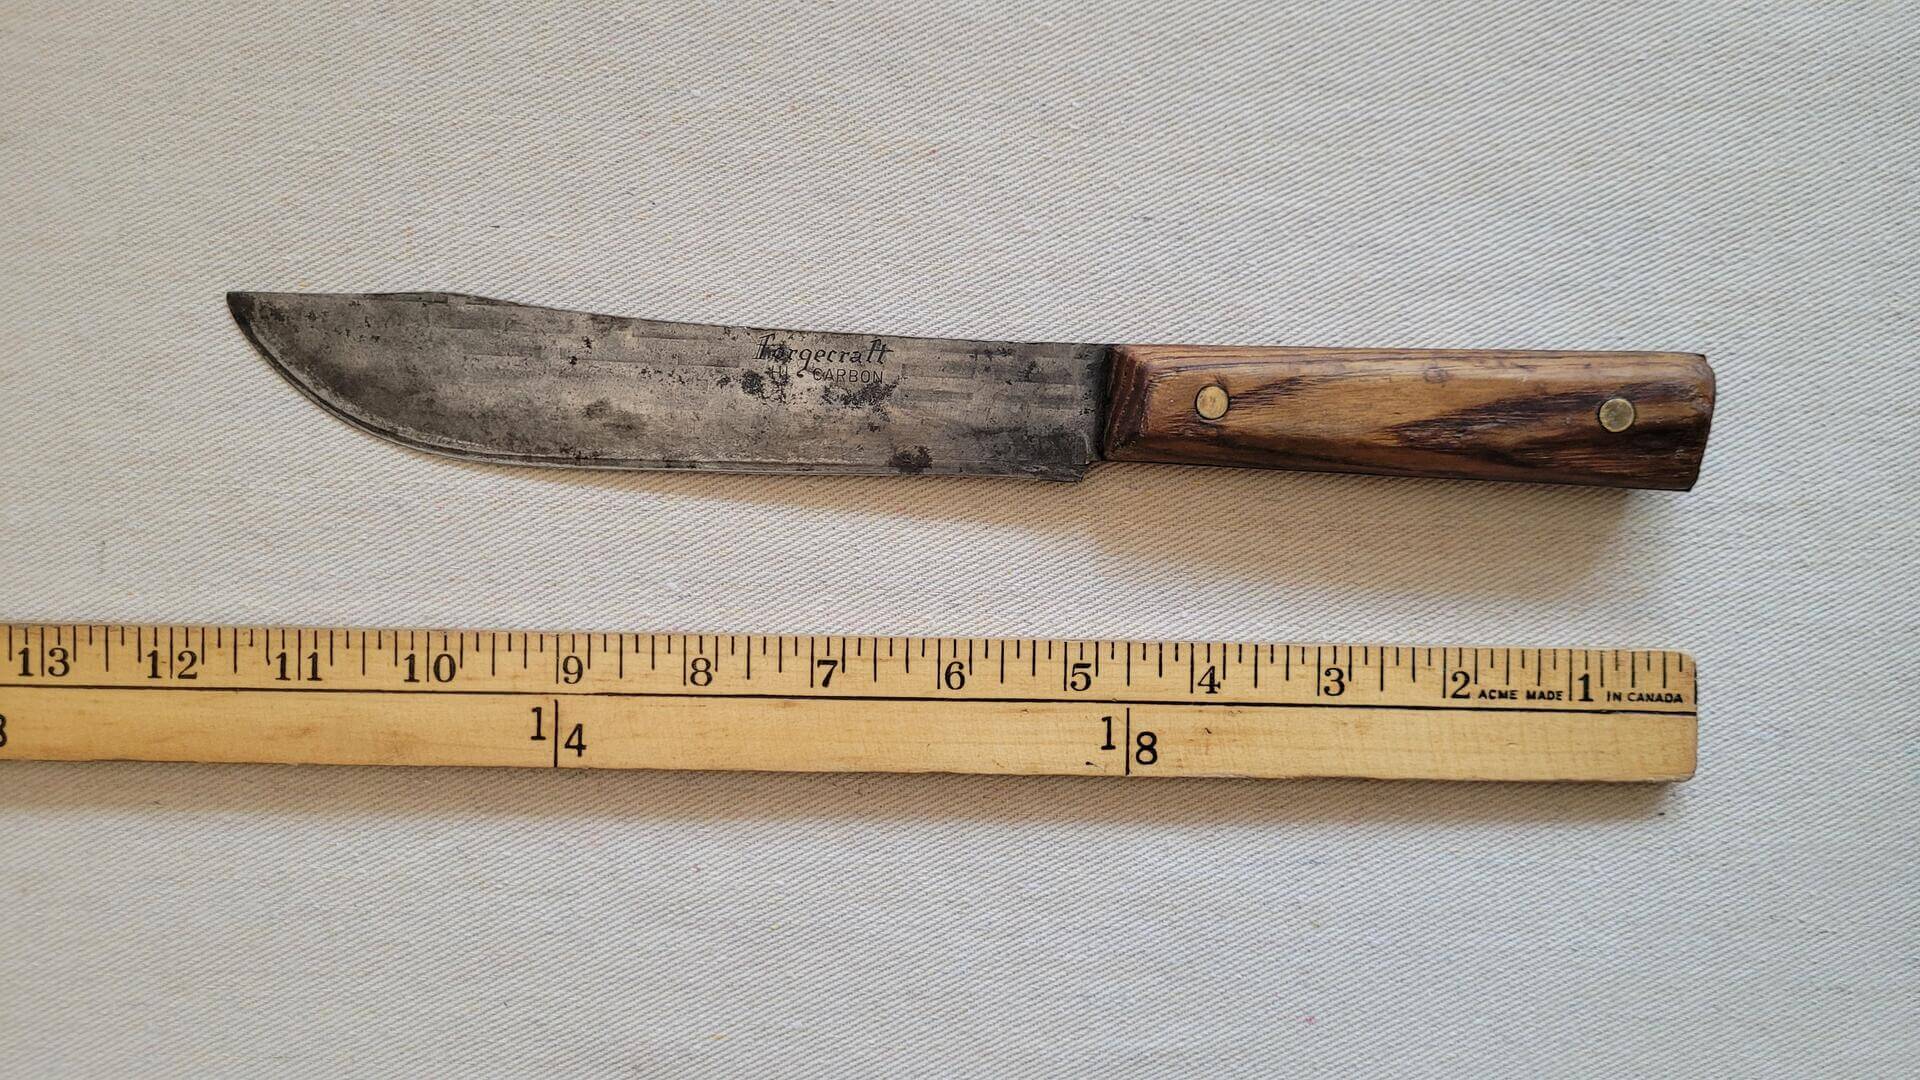 forgecraft-hi-carbon-steel-hickory-handle-kitchen-knife-vintage-mcm-made-in-usa-collectible-knives-cutlery-measurements